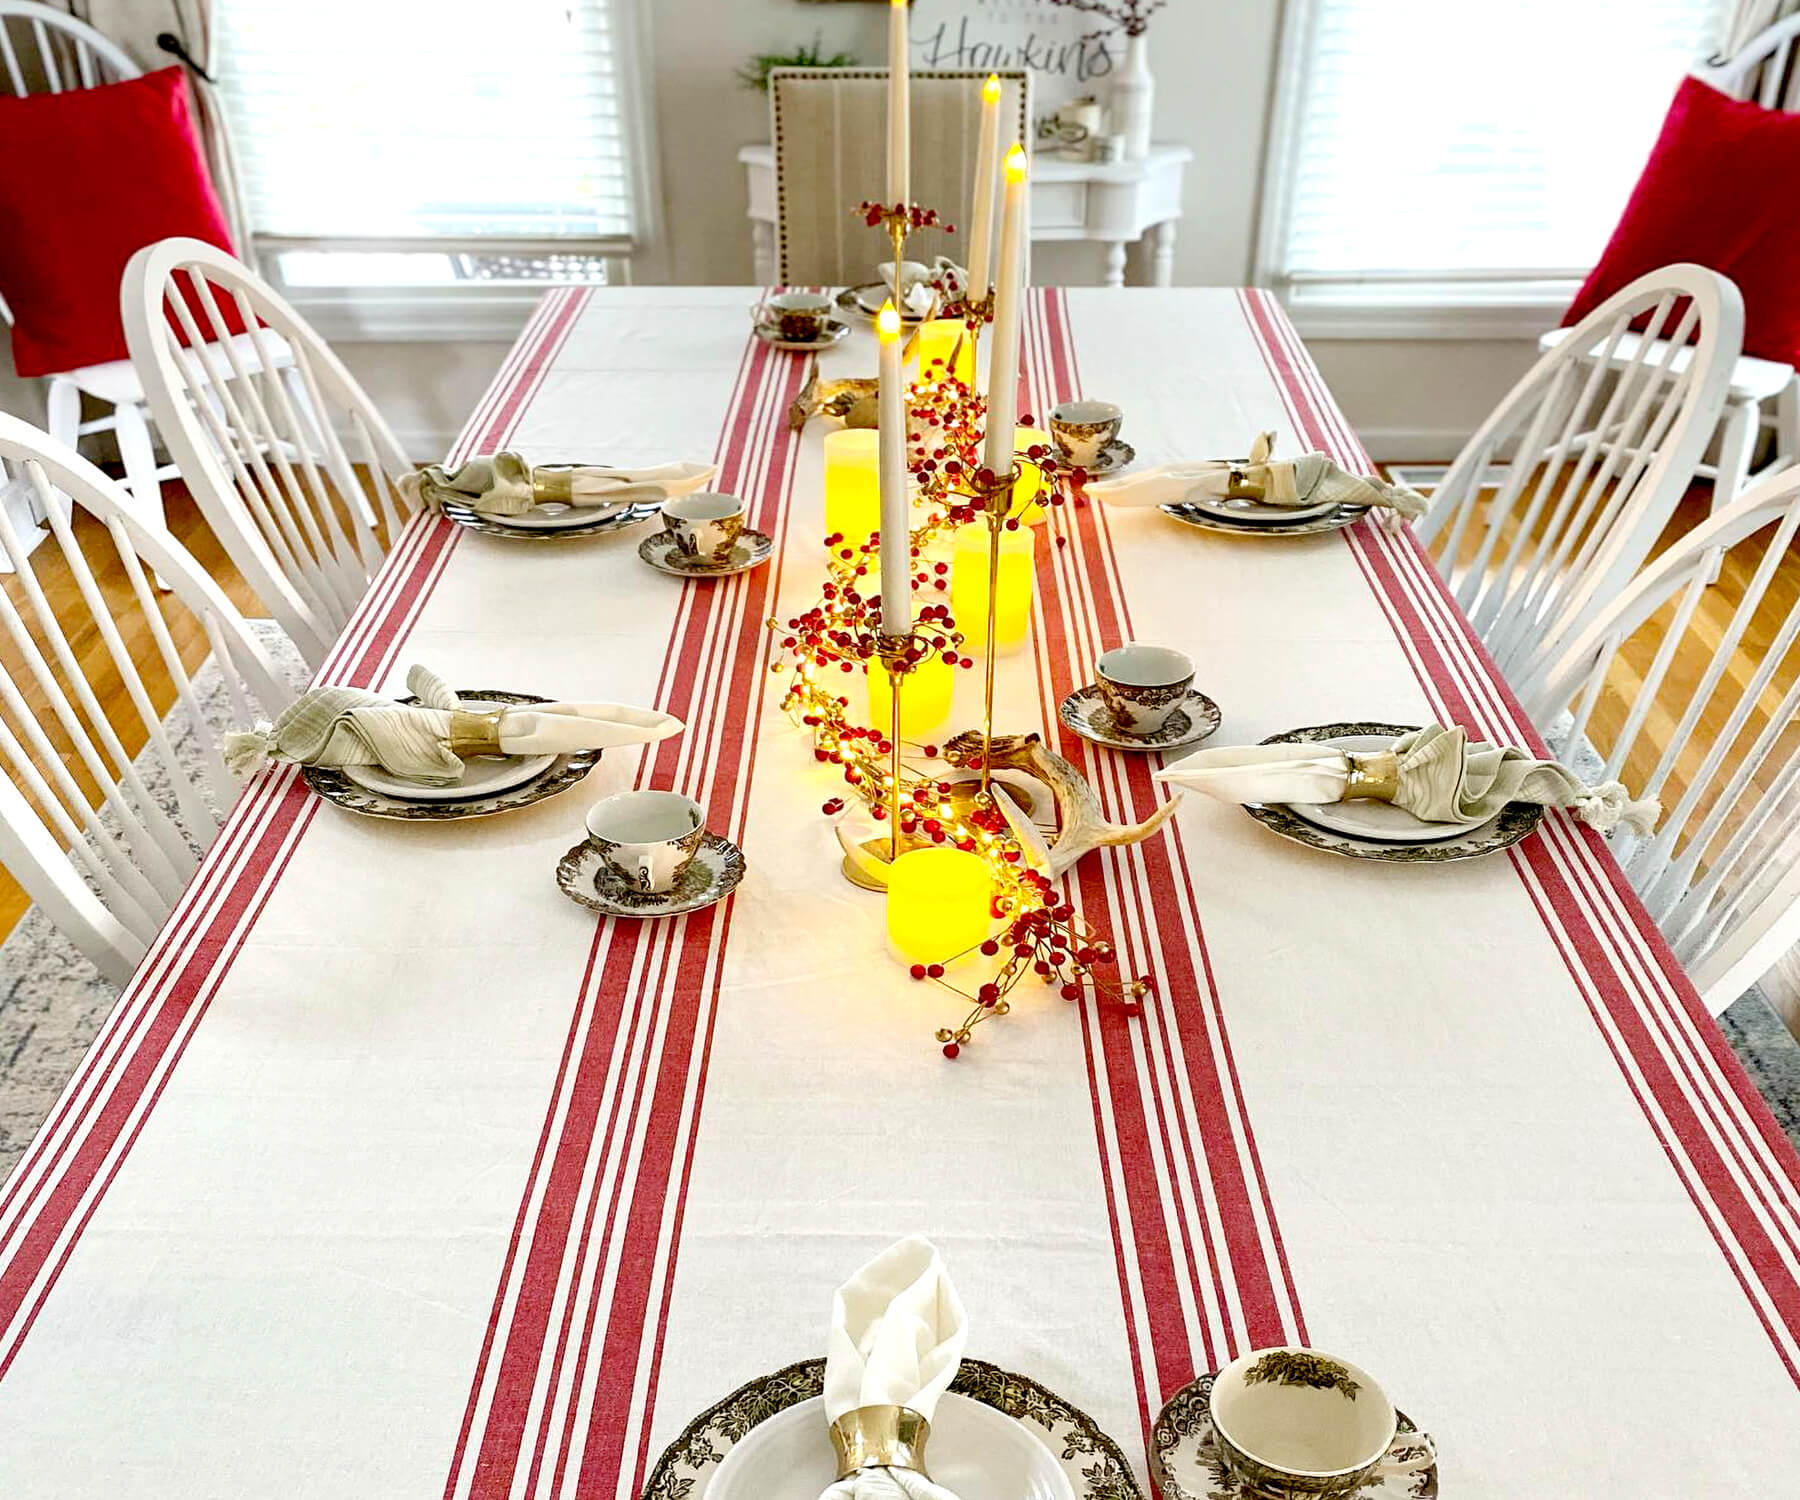 Add vibrance with red & cream square tablecloth or opt for elegance with rectangular tablecloths in the same palette.